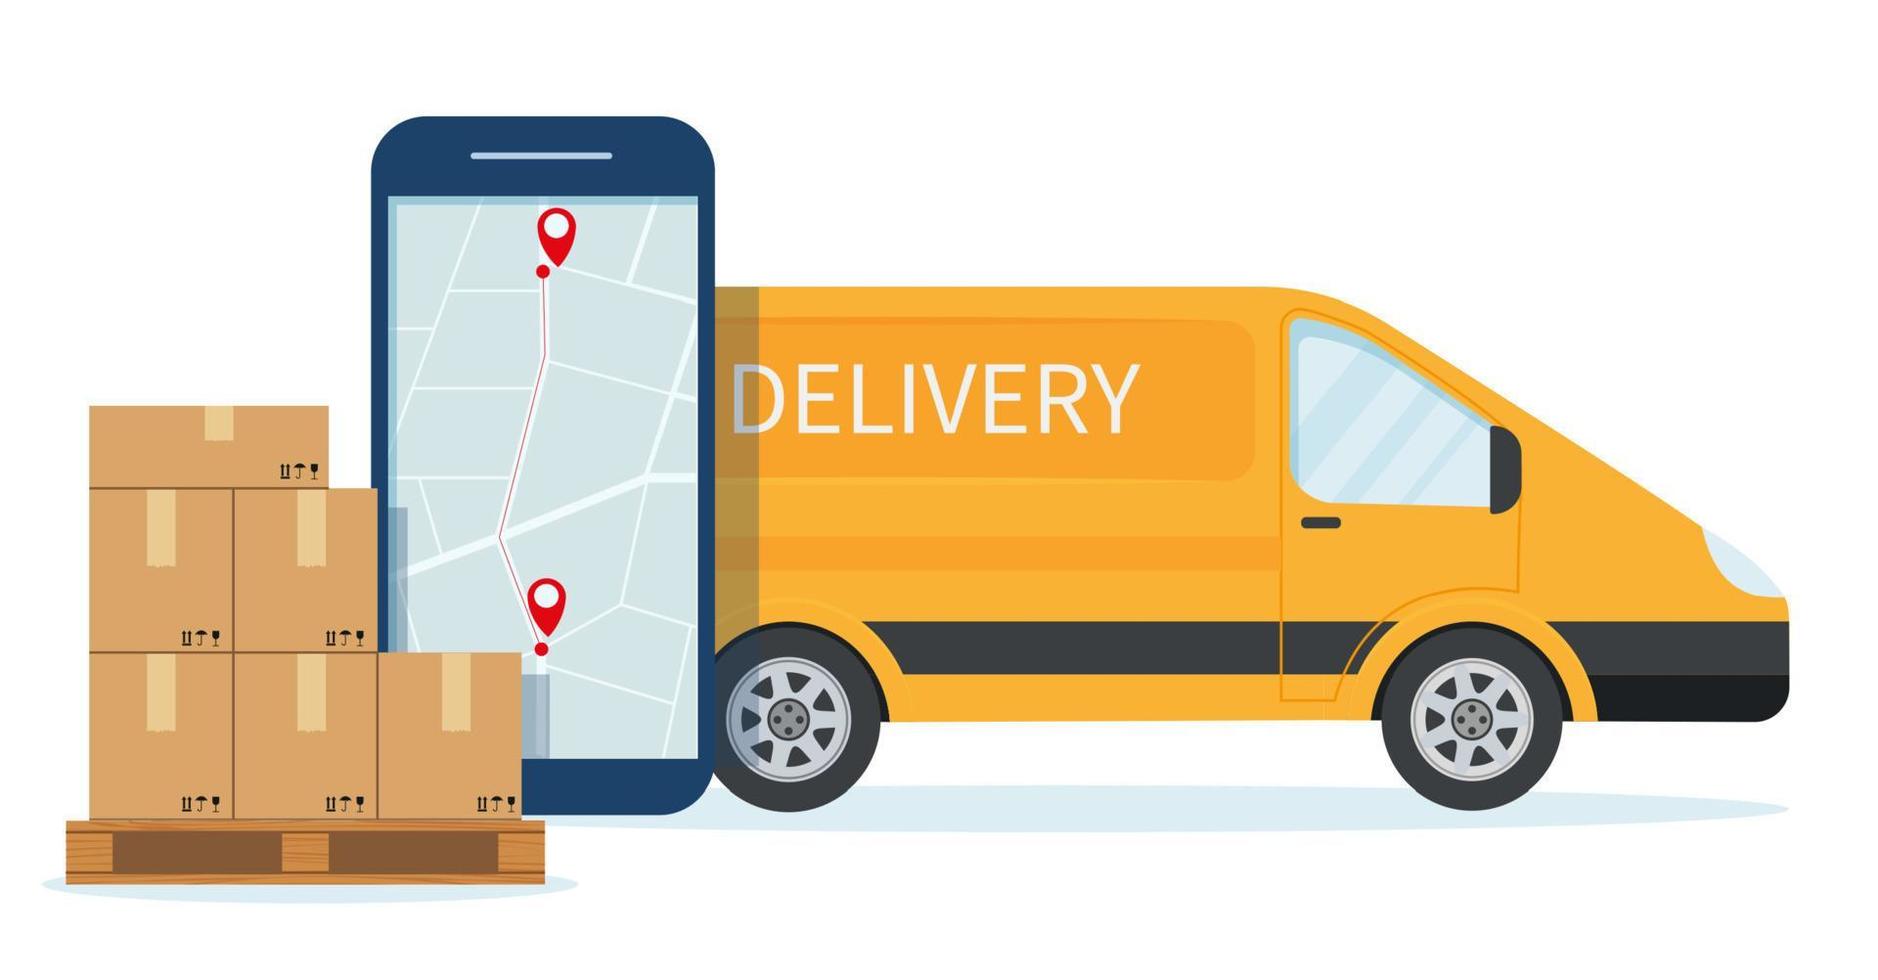 Free, Express, Home or Fast delivery service by van. Car with stack of parcels and smartphone with mobile app for online delivery tracking. Flat style vector illustration.